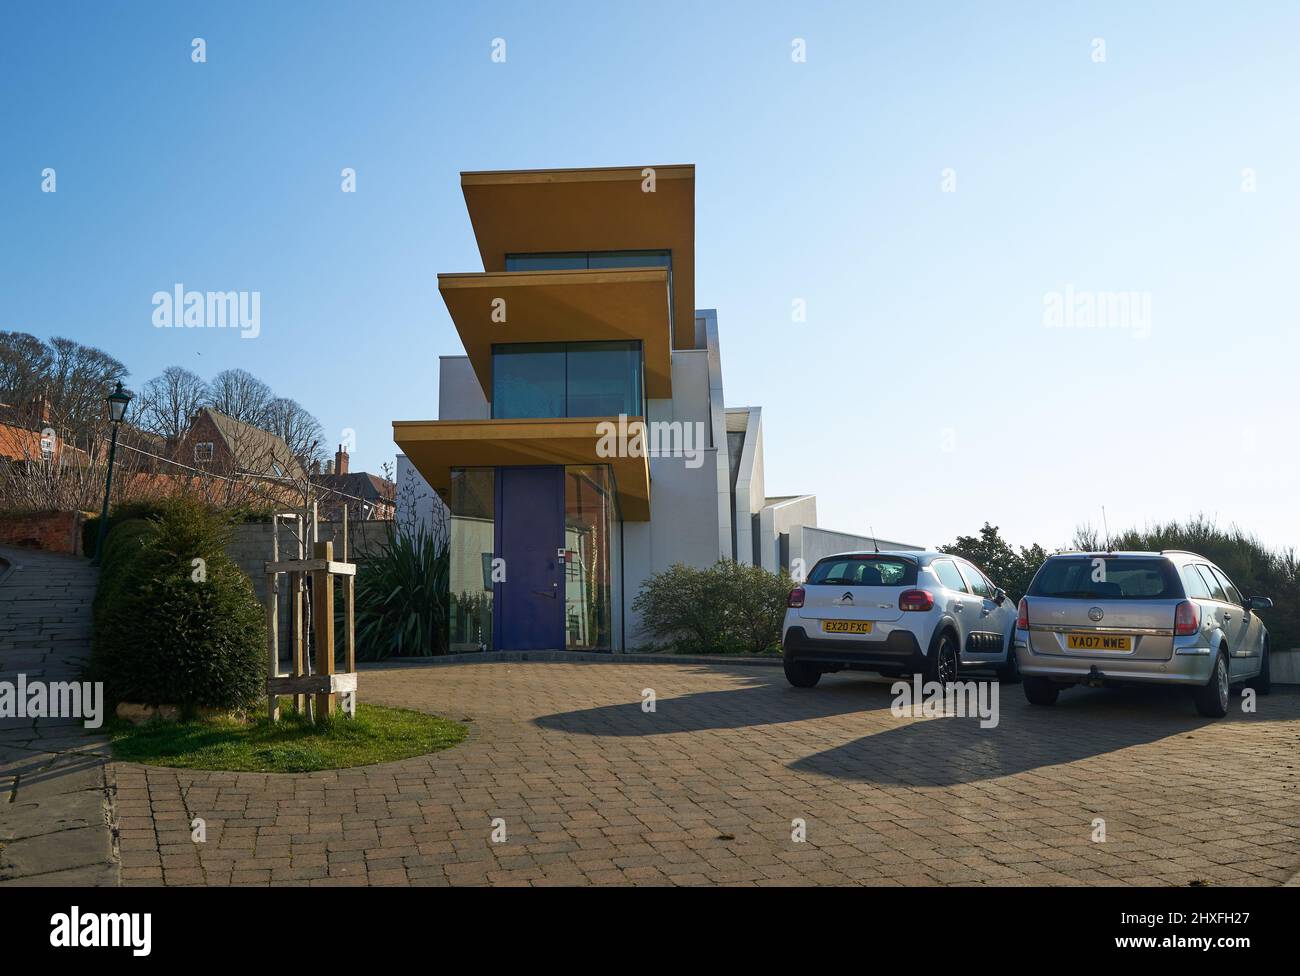 Modern design house architecture example Stock Photo